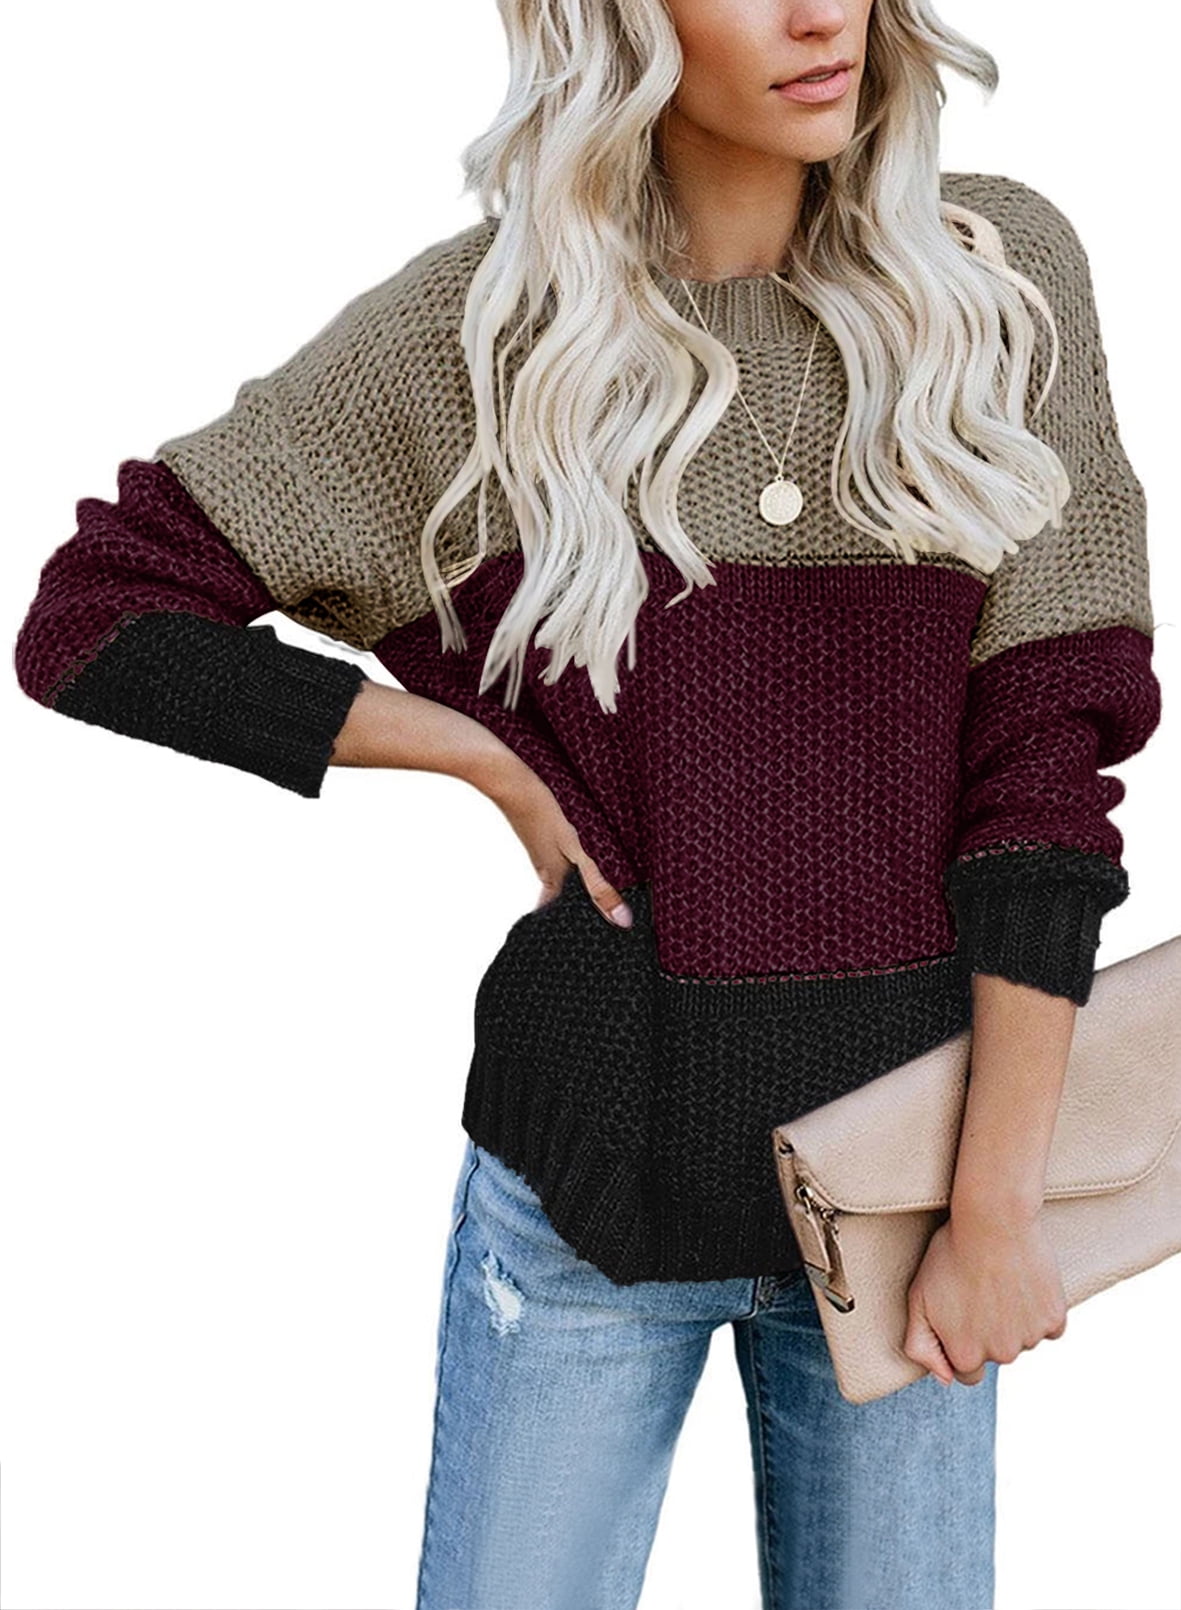 KIRUNDO Women’s Stripe Color Block Short Sweater Long Sleeve Stitching Color Crew Neck Loose Knitted Pullovers Jumper Tops 